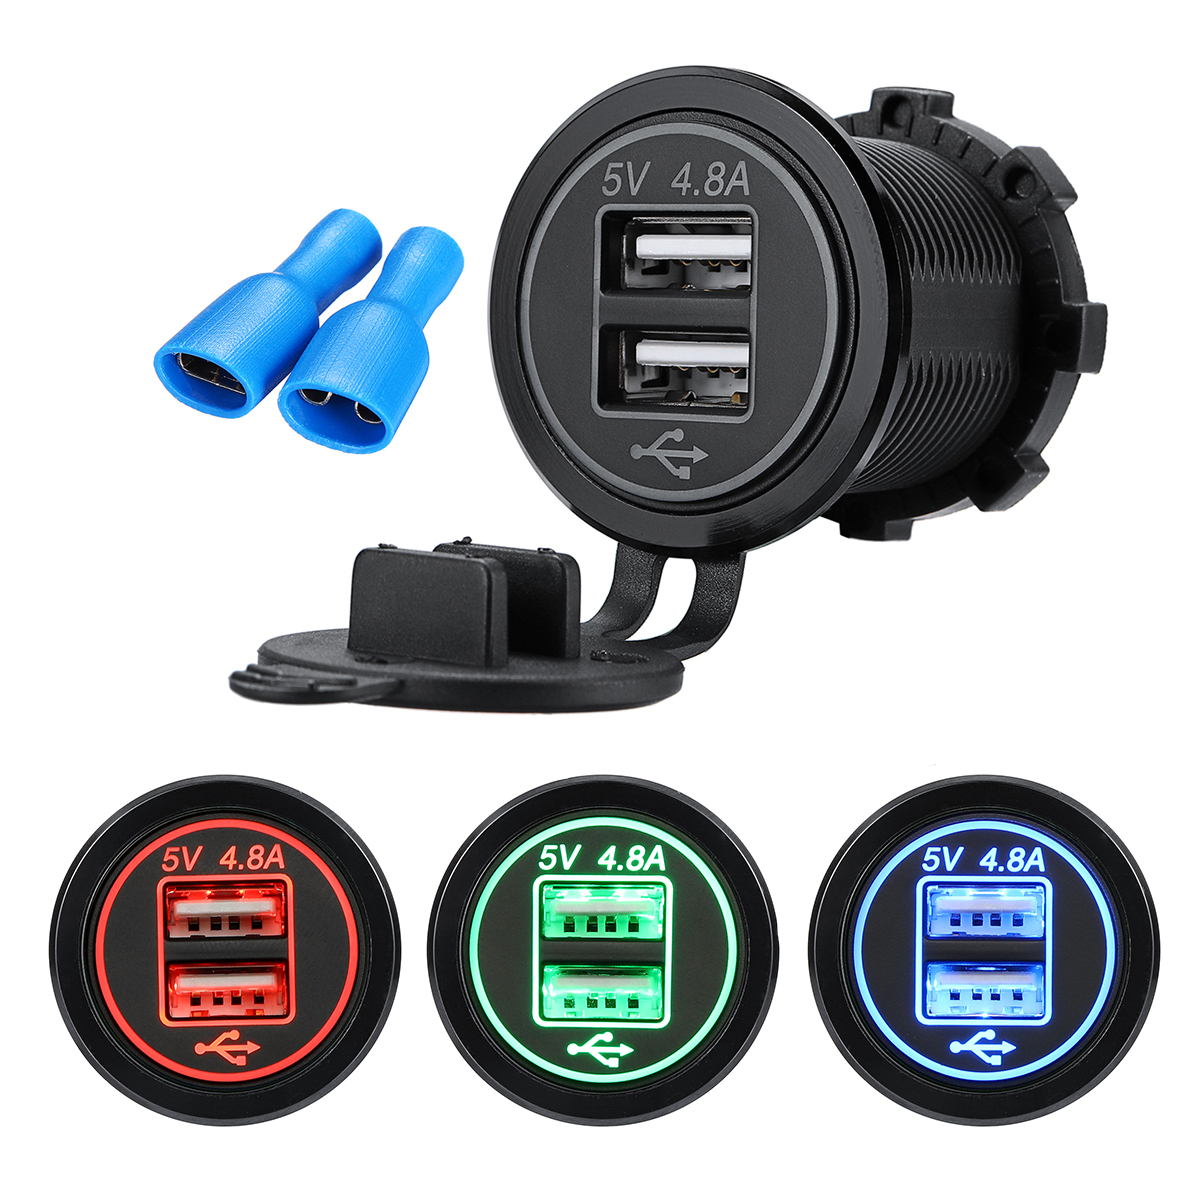 4.8A Dual USB Car Charger 2 Port LCD Display 12V/24V Universal Charging for Phone